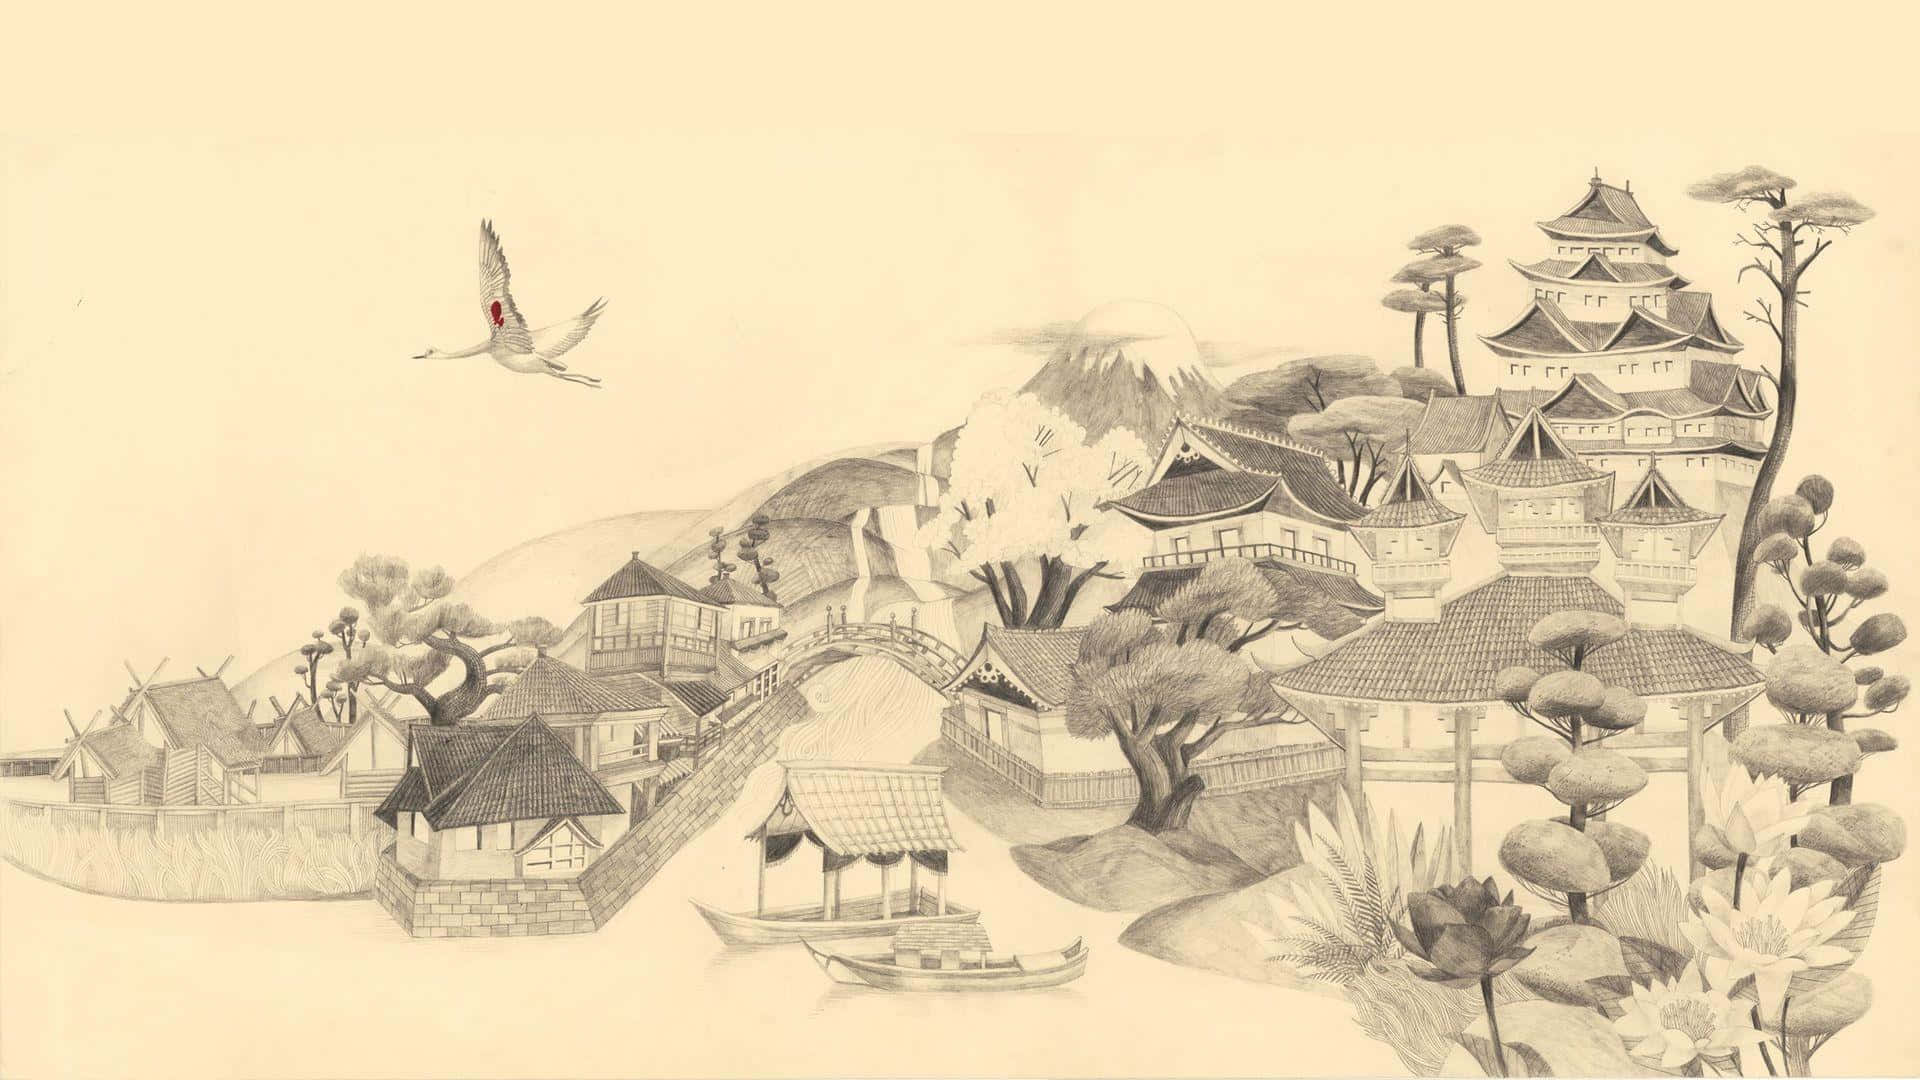 A Drawing Of A Village With A Bird Flying Over It